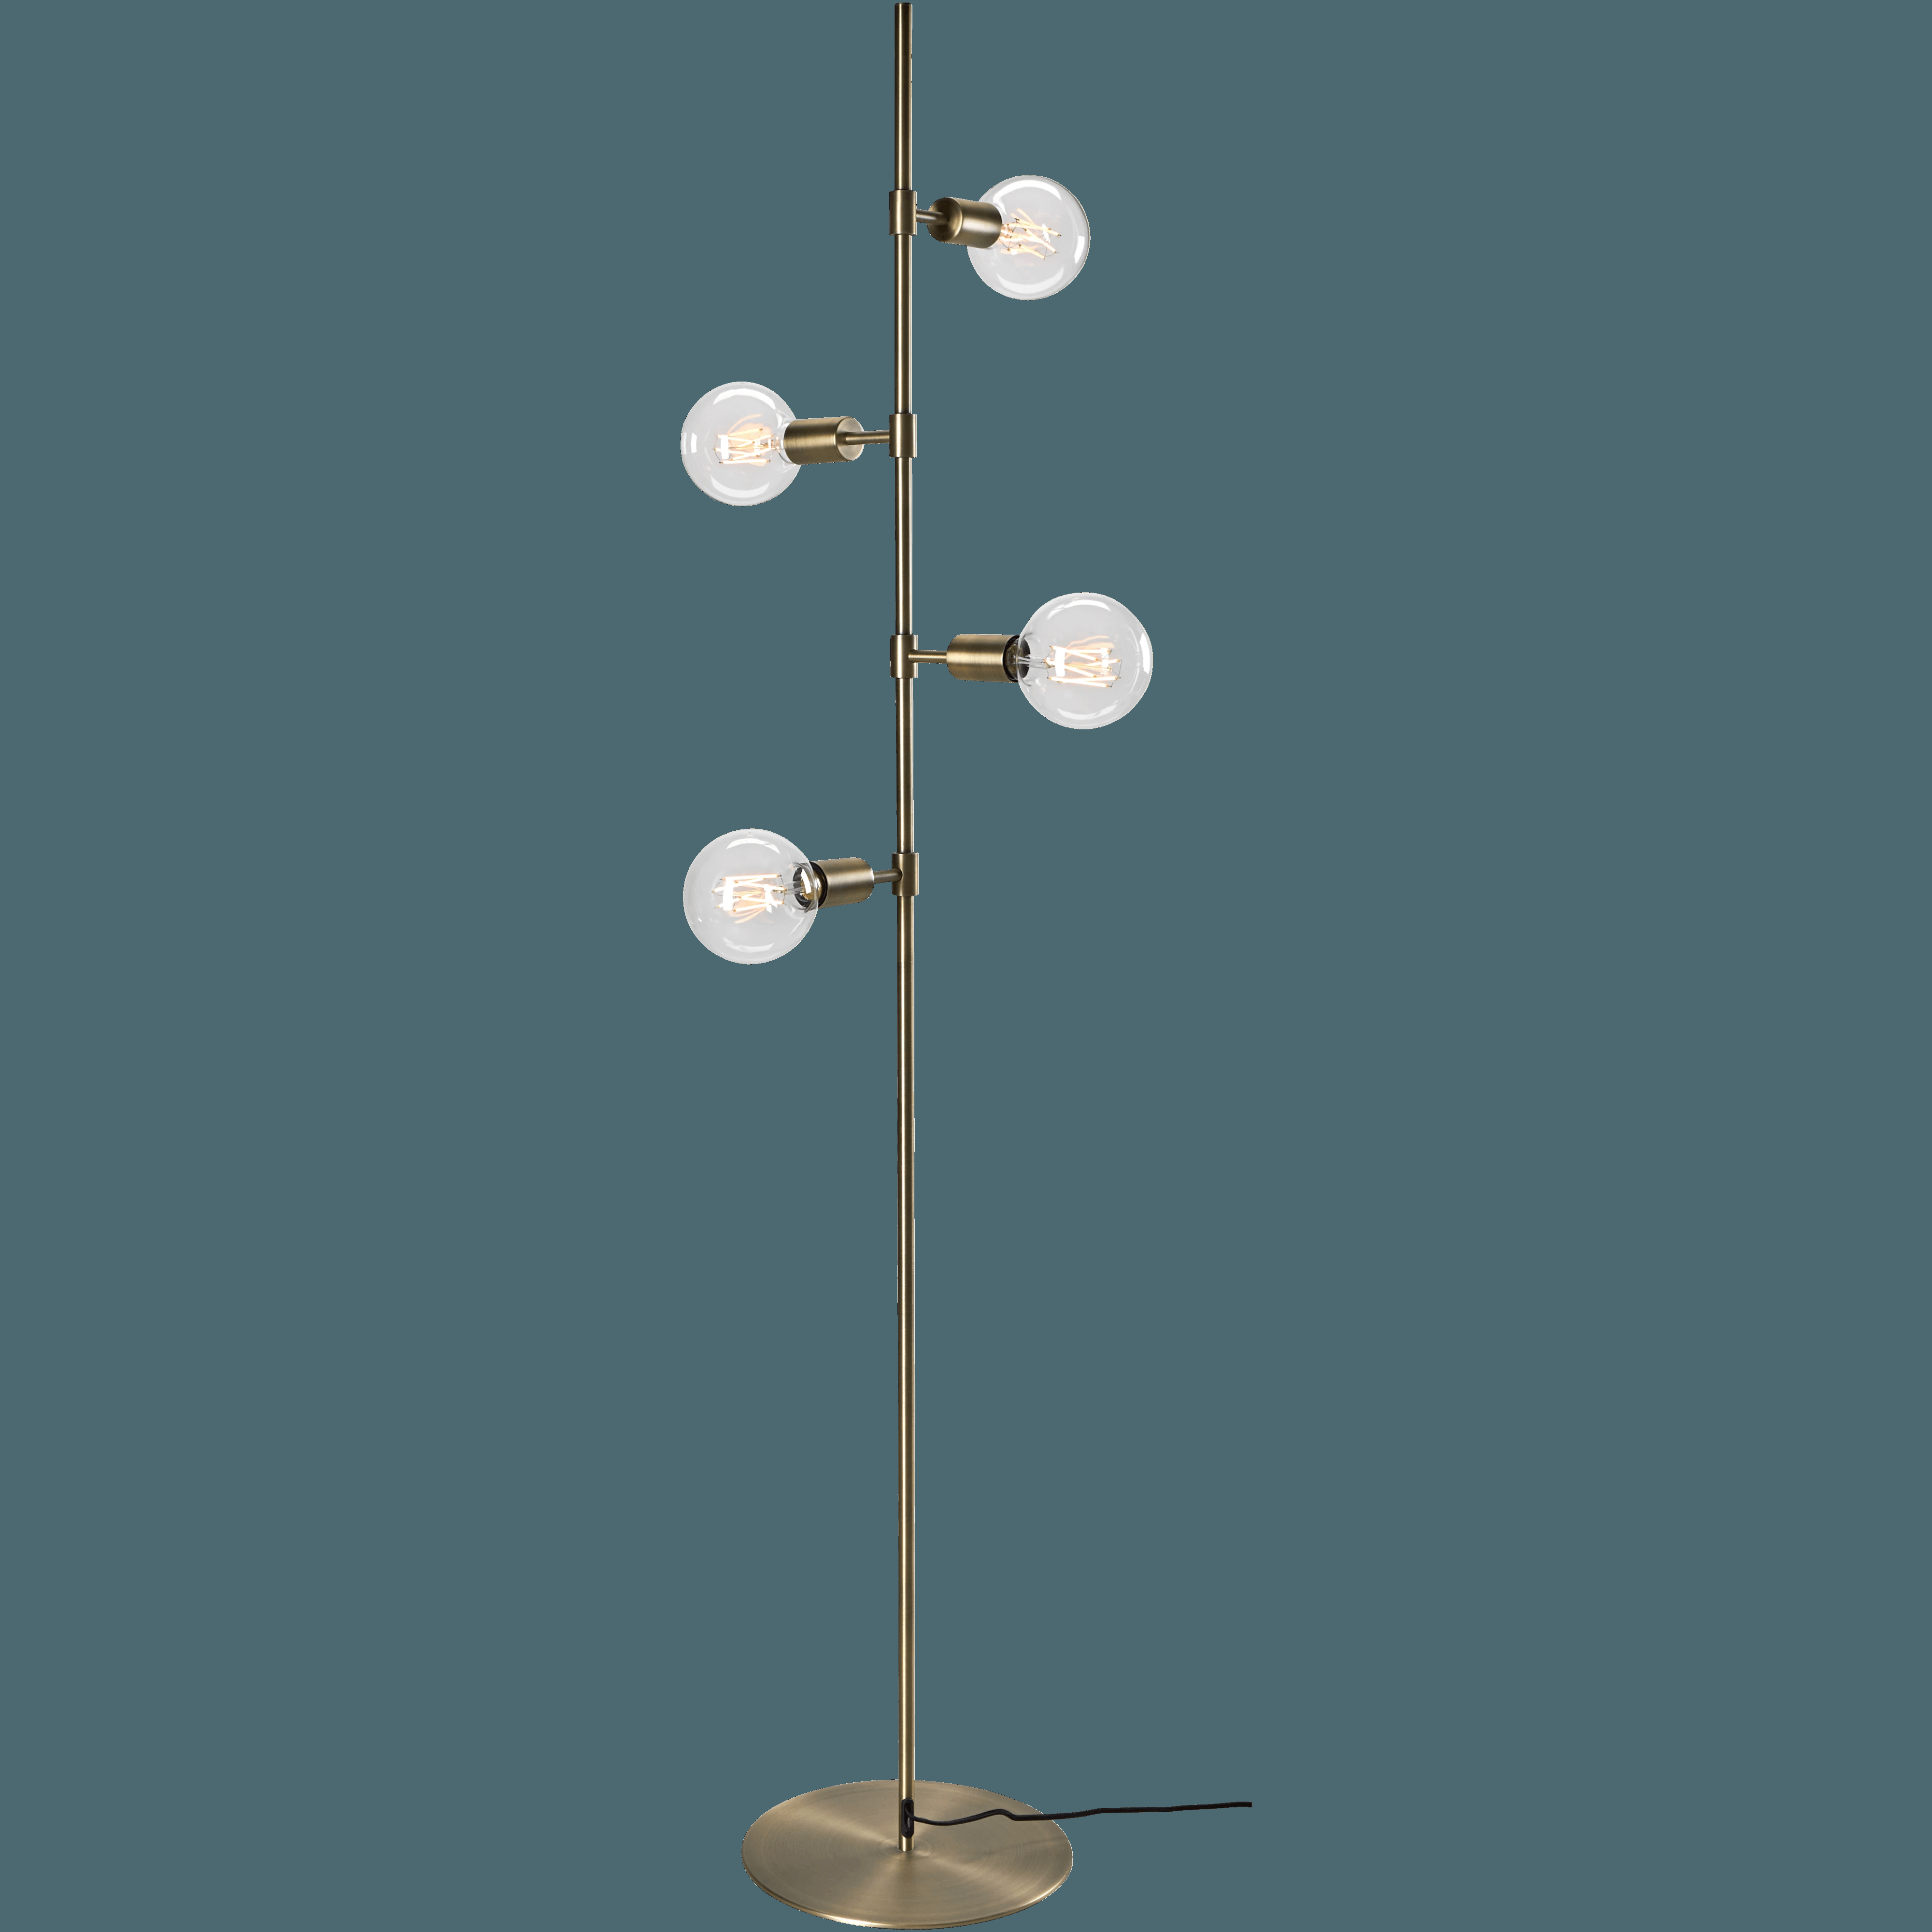 Piper Floor Lamp throughout sizing 4000 X 4000